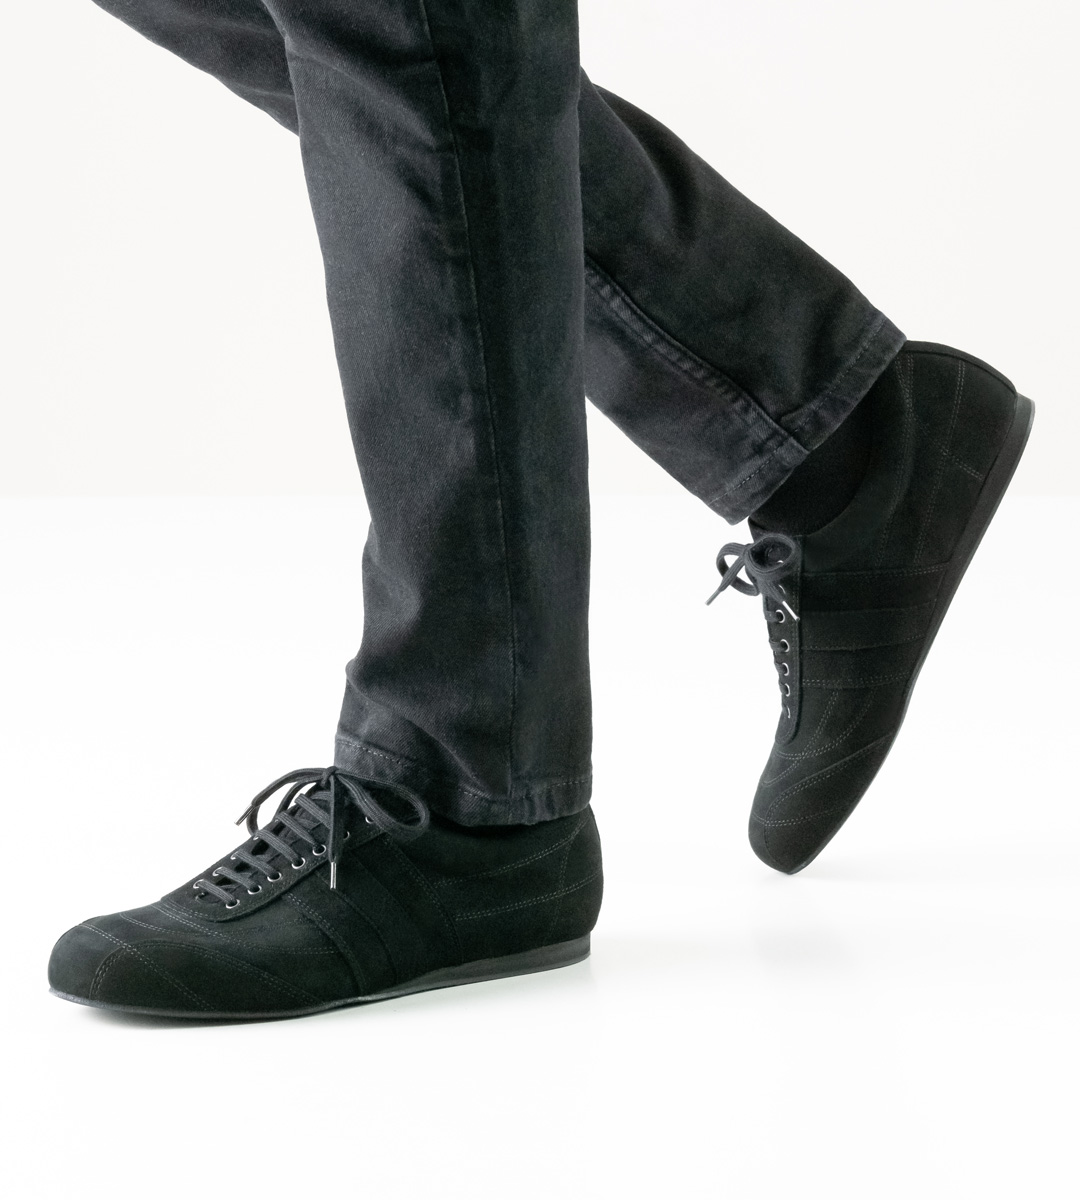 Werner Kern men's dance shoe in velour in combination with black trousers